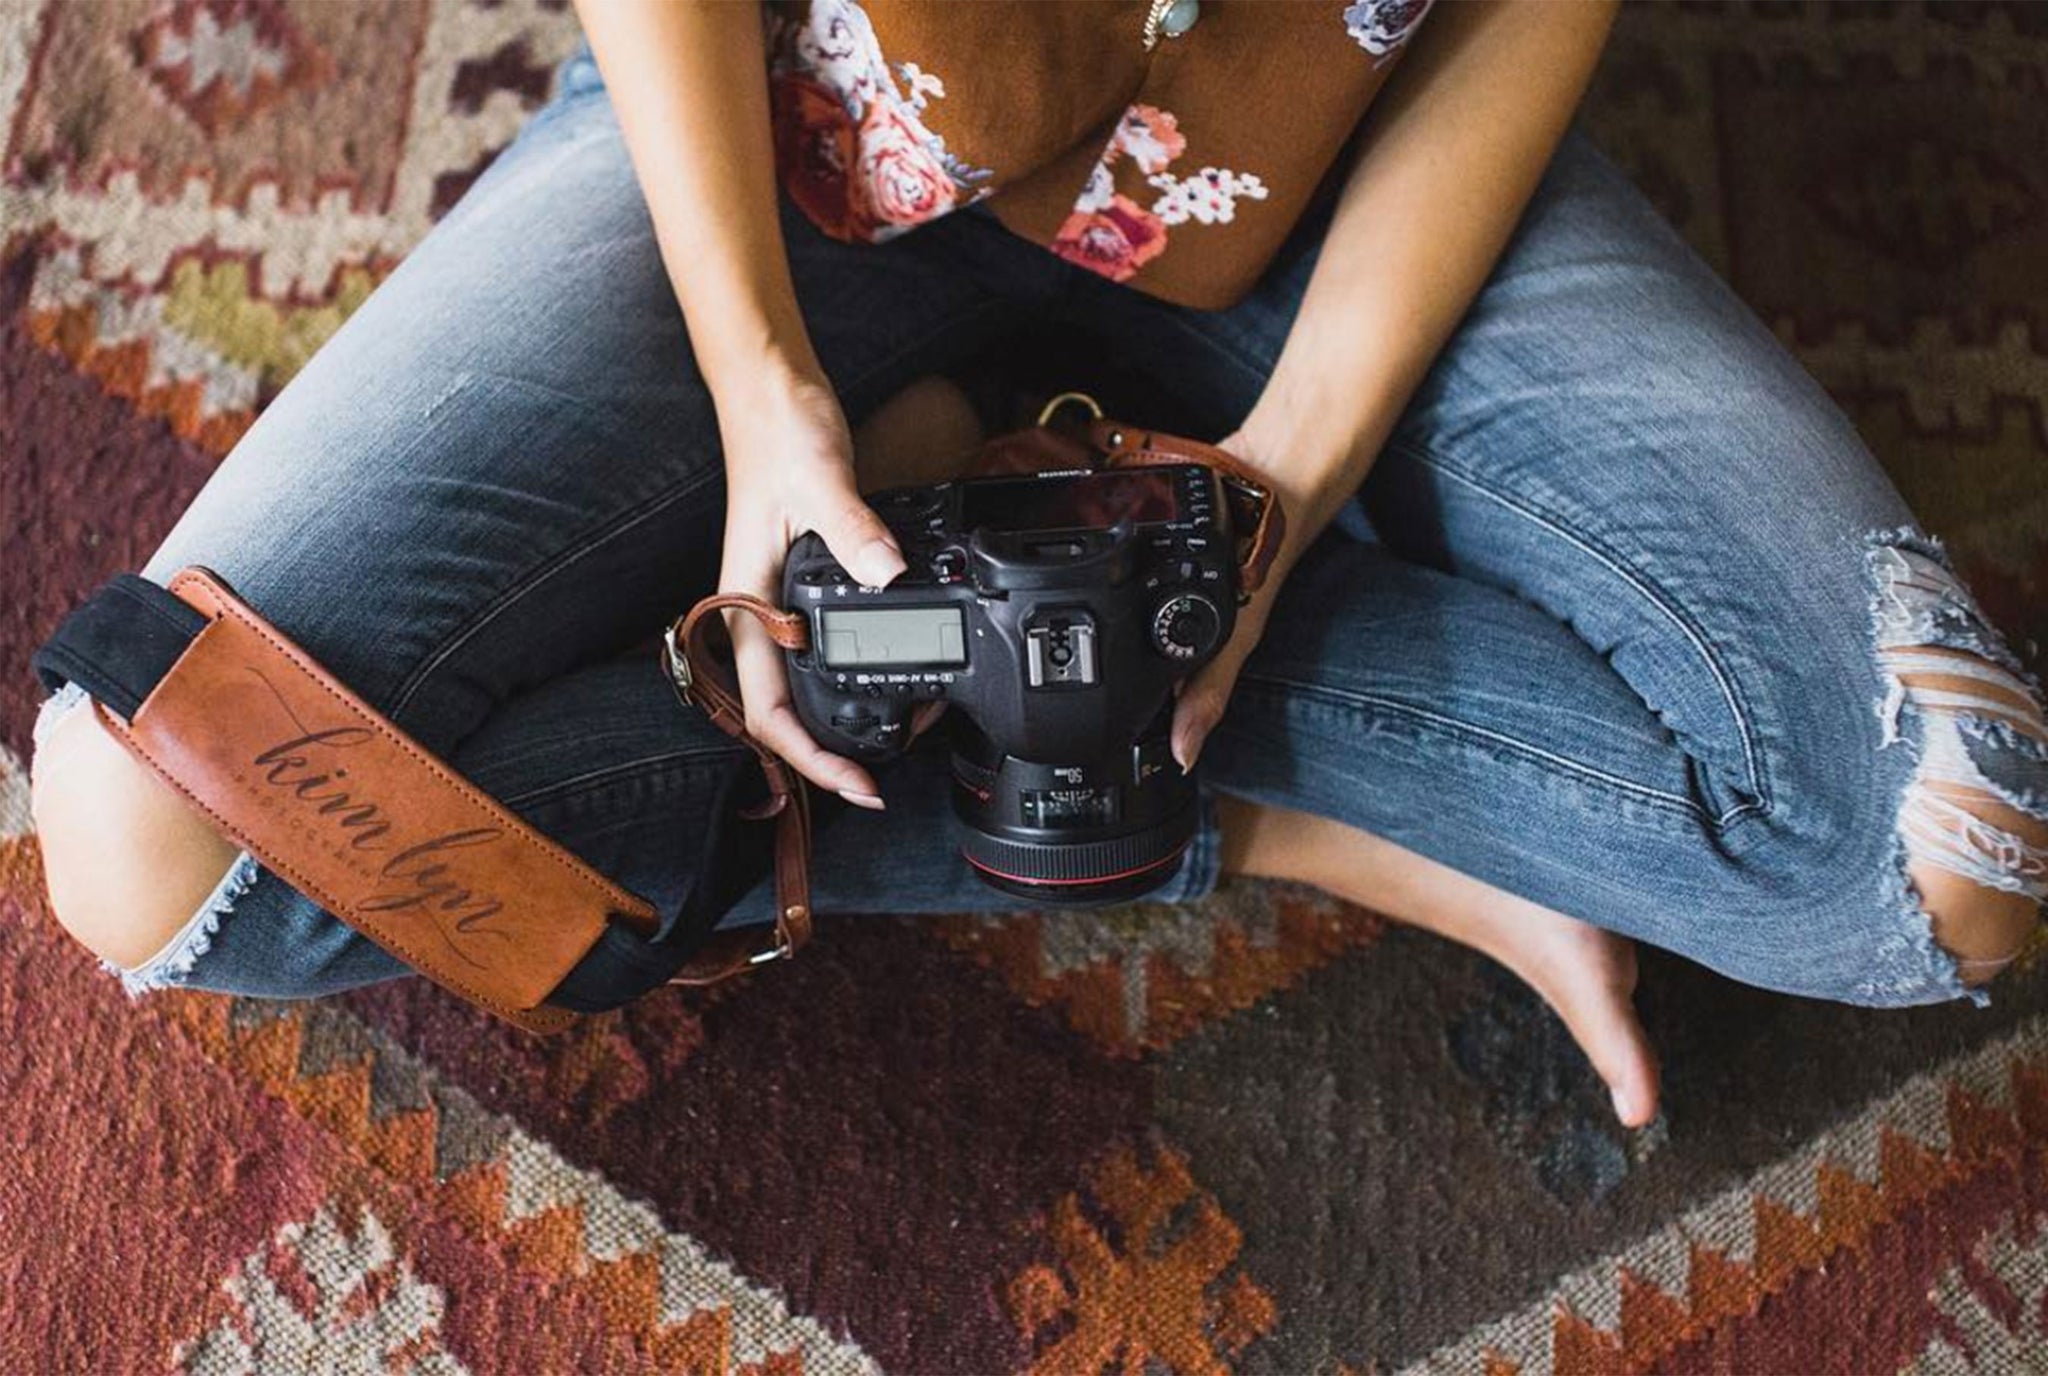 Read these simple yet effective do's and don'ts of running your own photography business to avoid common mistakes made by new creative entrepreneurs.